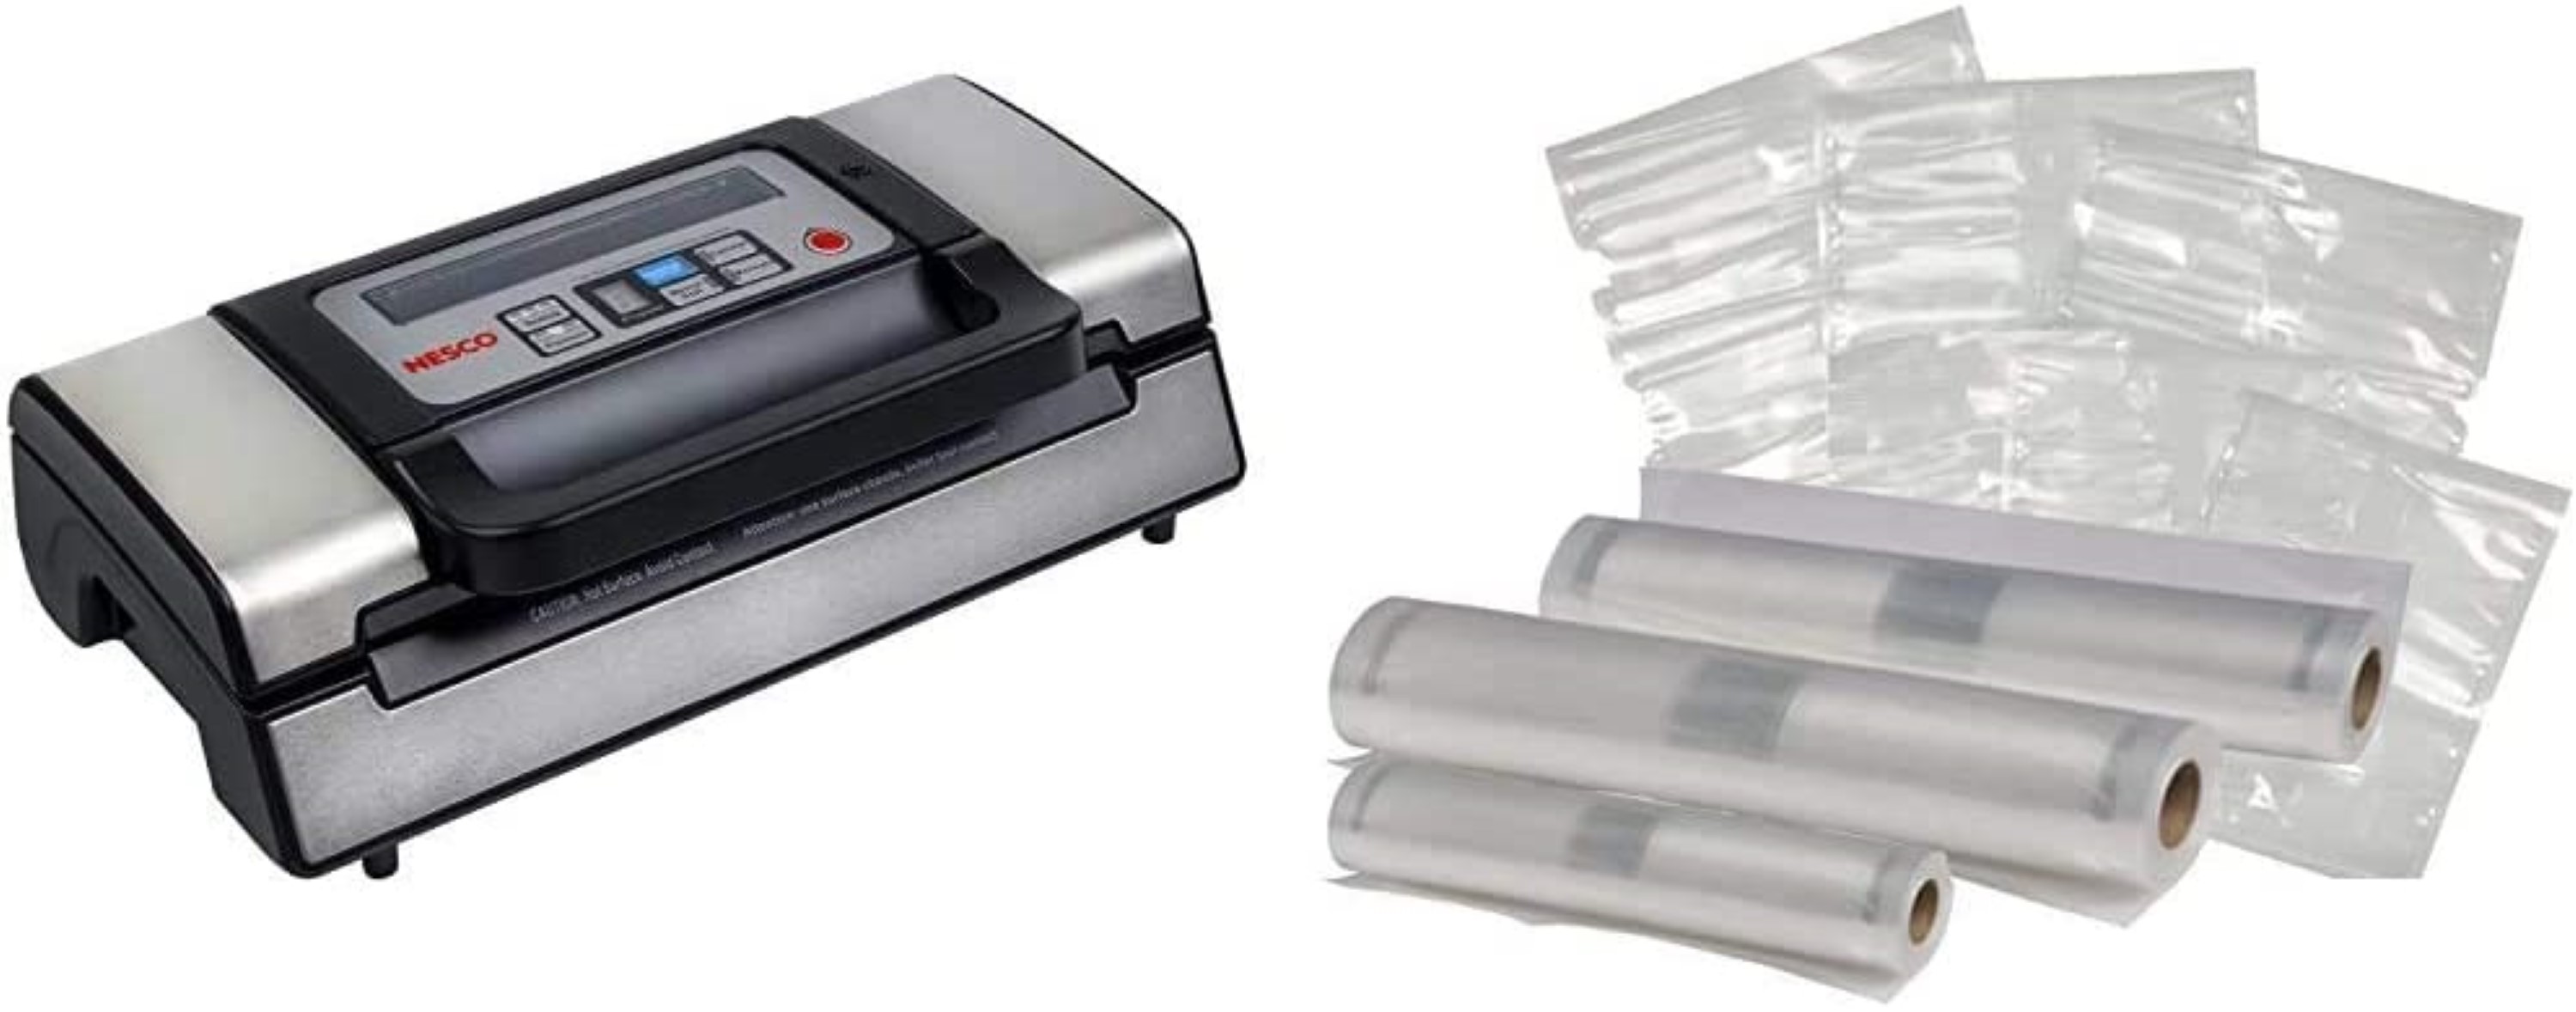 NESCO VS-12, Deluxe Vacuum Sealer with Bag Starter Kit and Viewing Lid,  Compact Design, Silver 